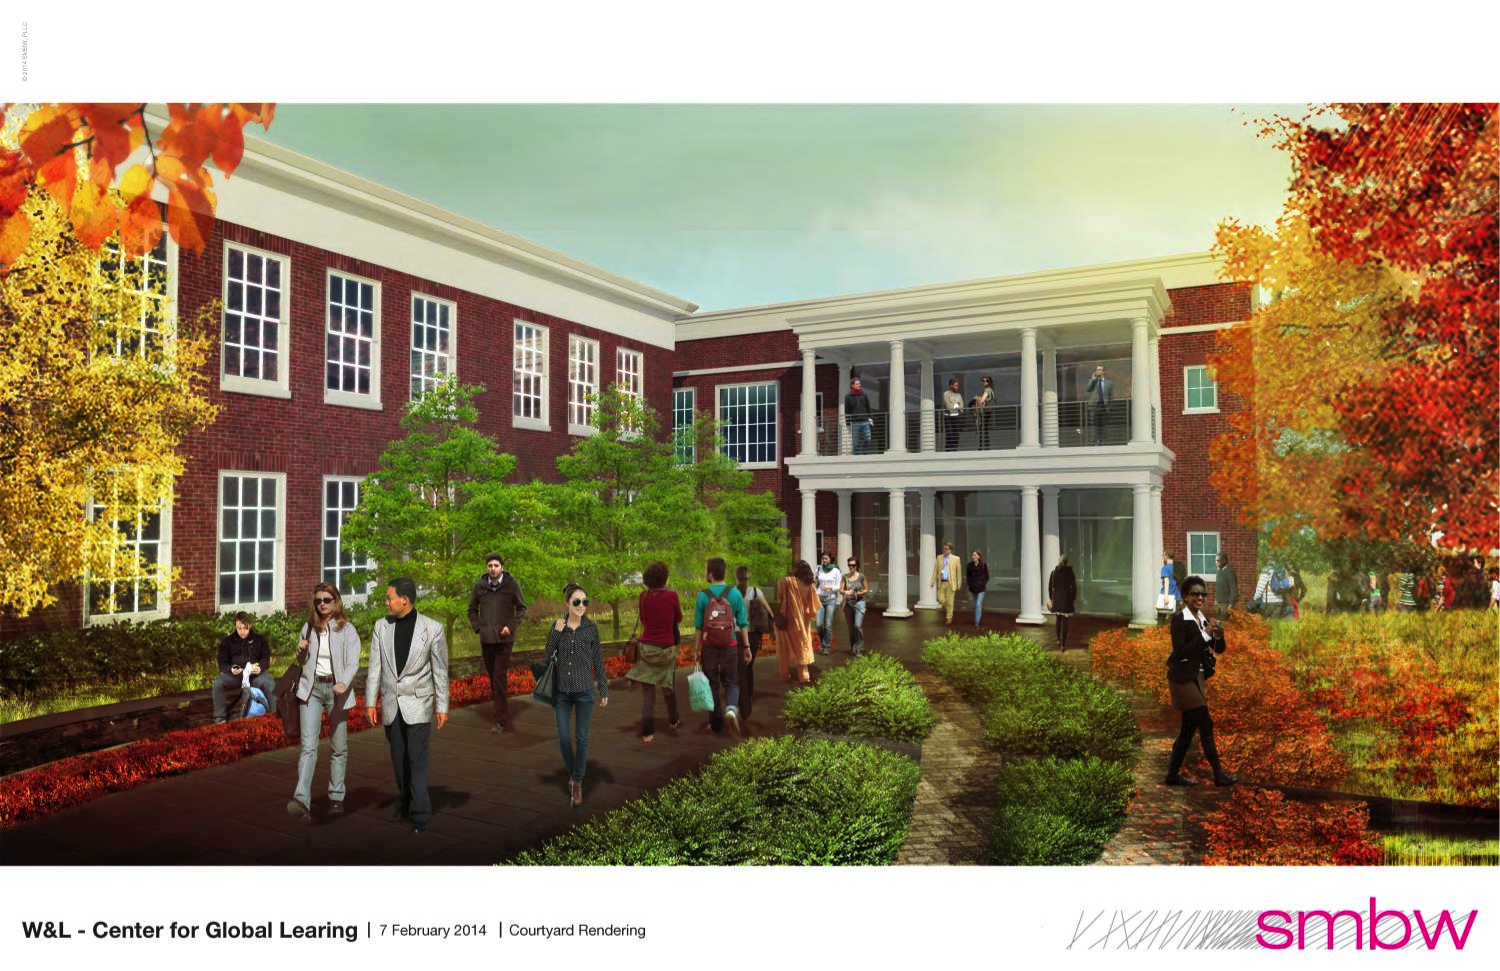 Courtyard Rendering of the Center for Global Learning